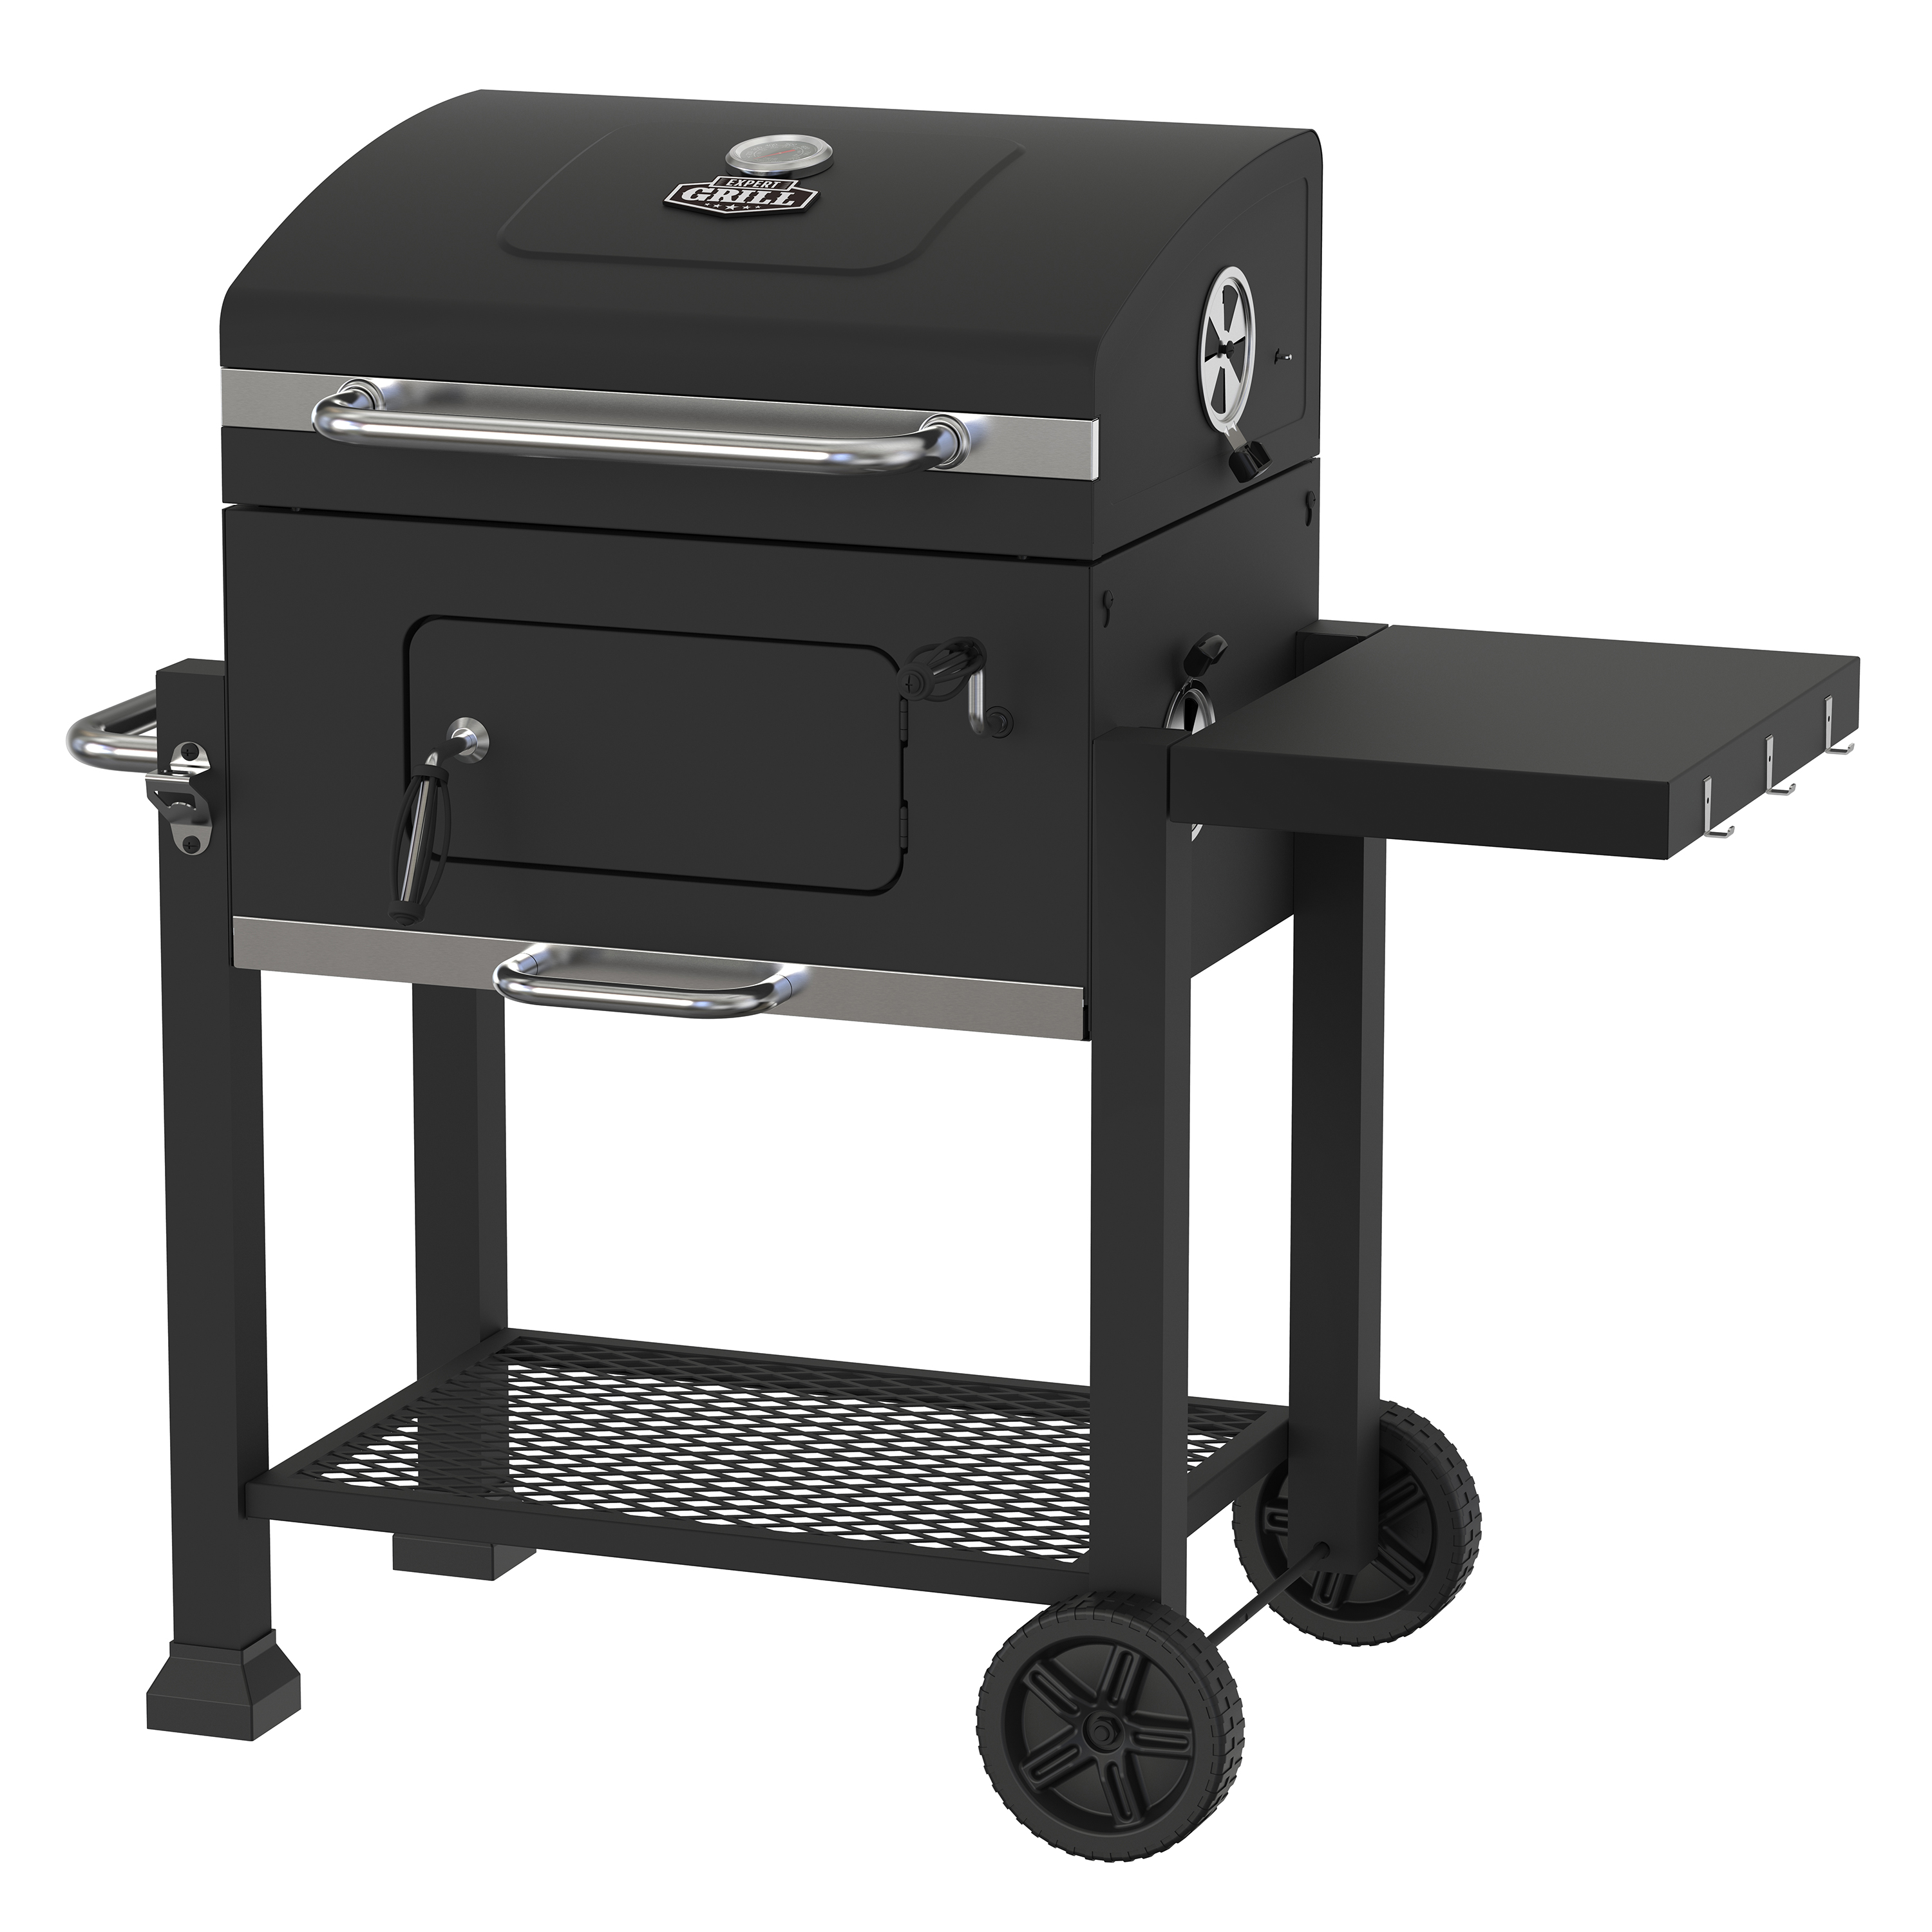 Expert Grill Heavy Duty 24-inch Charcoal Grill, Black - image 1 of 13